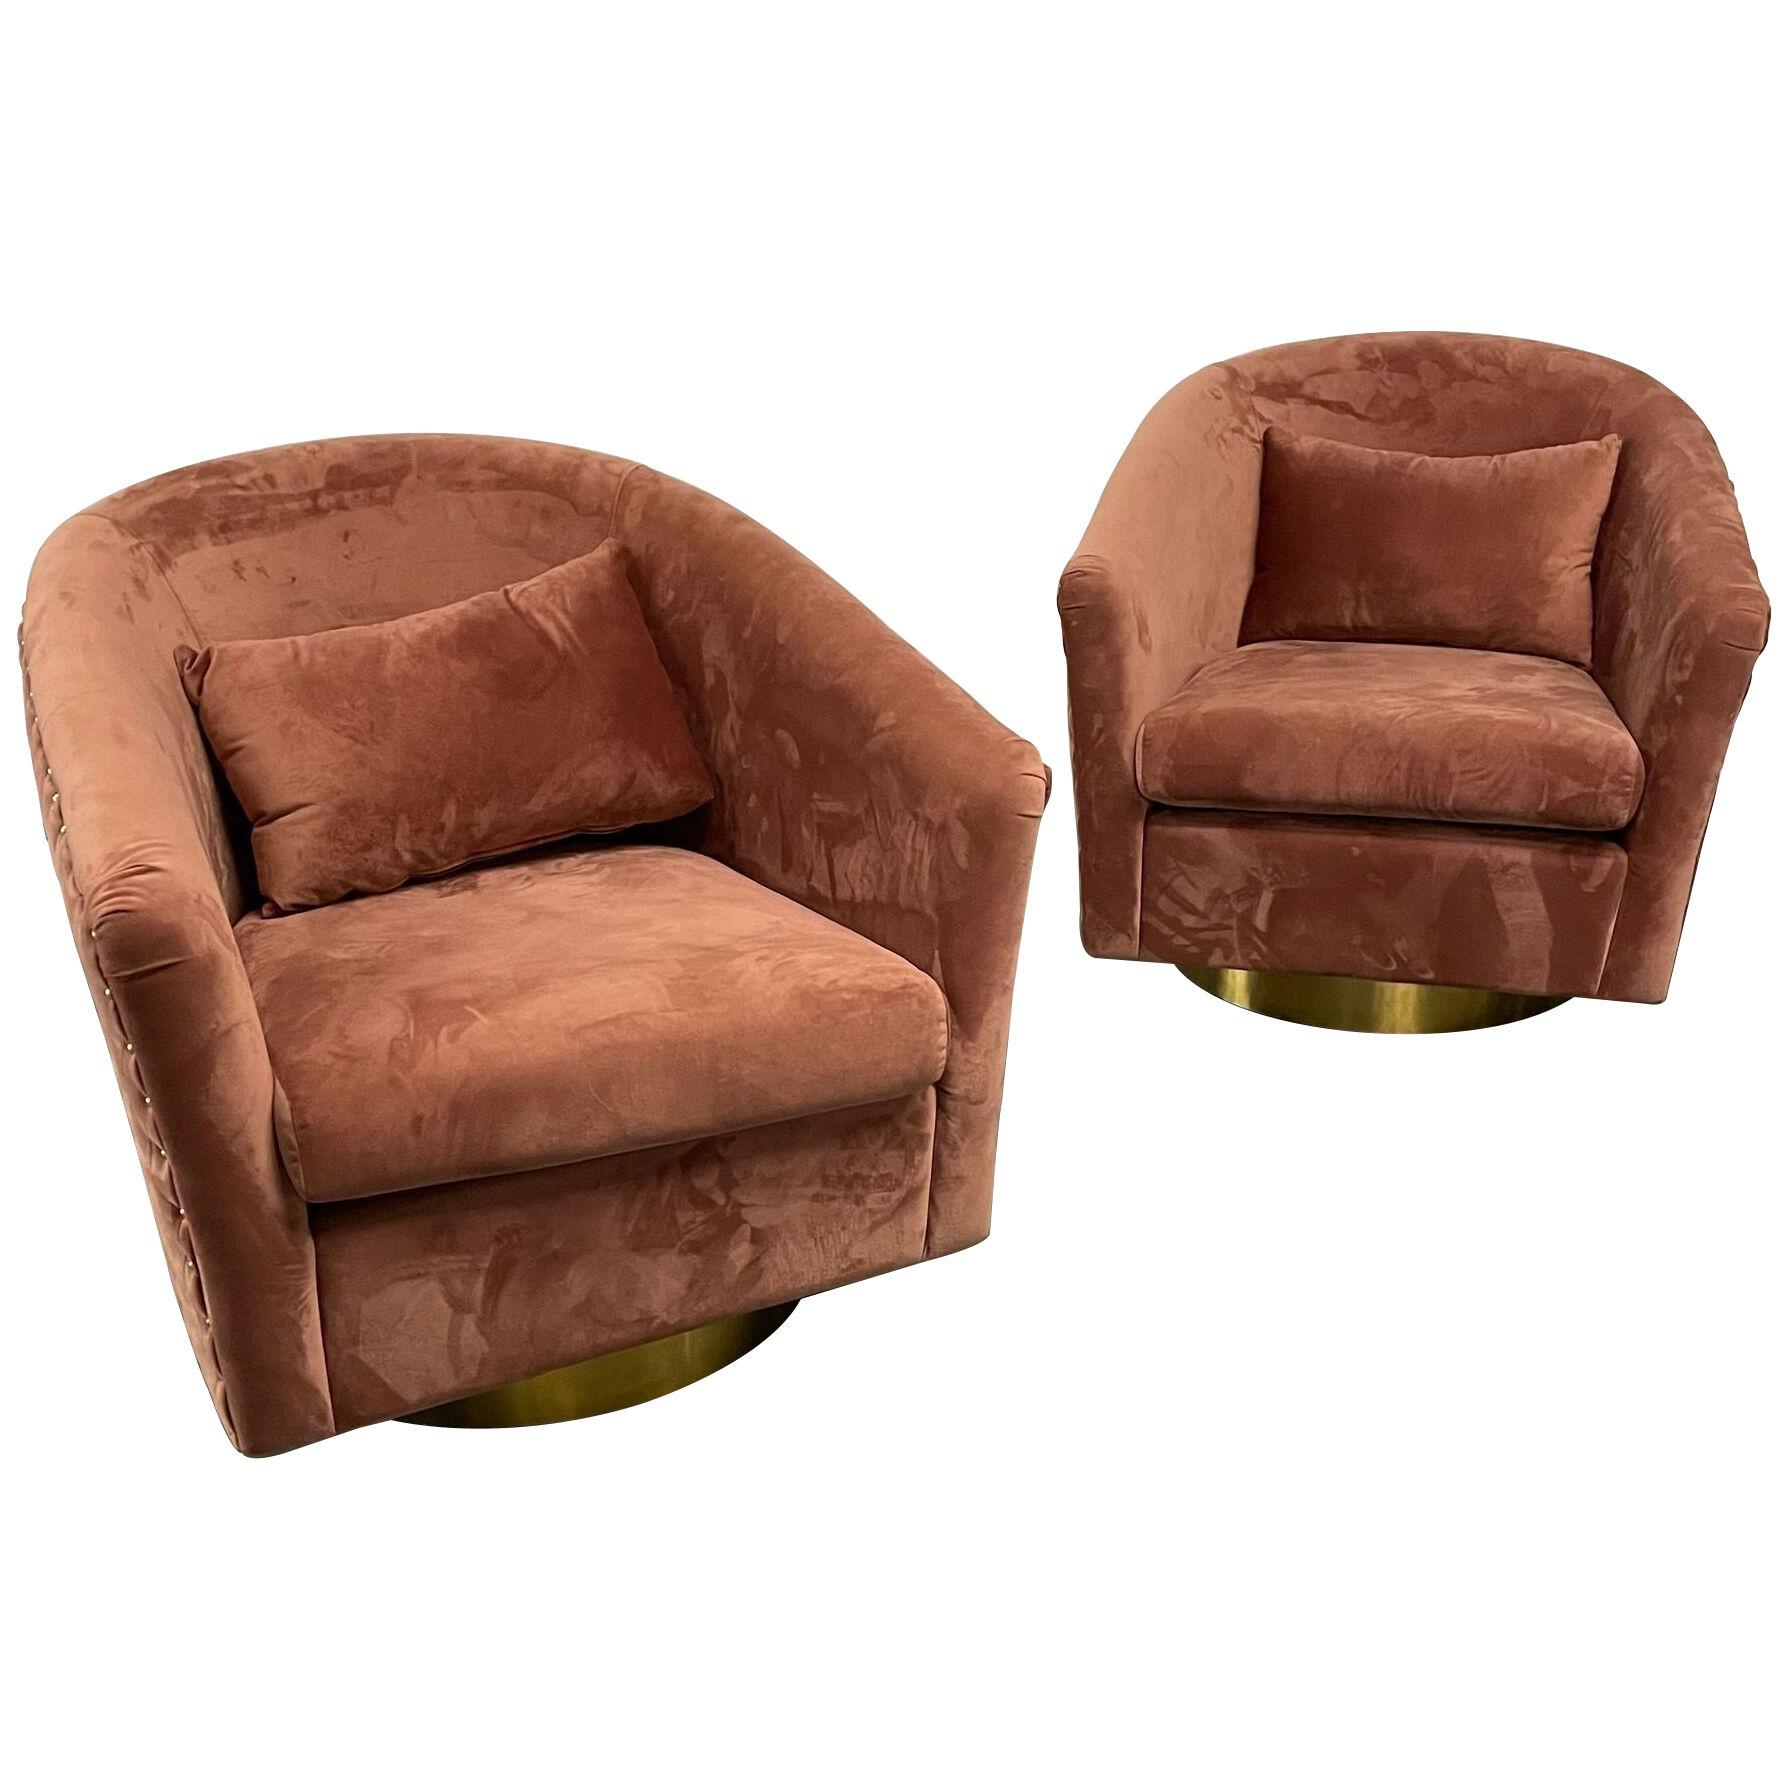 Pair of Modern Chanel Style Swivel / Lounge Chairs, Tufted Barrel Back, American